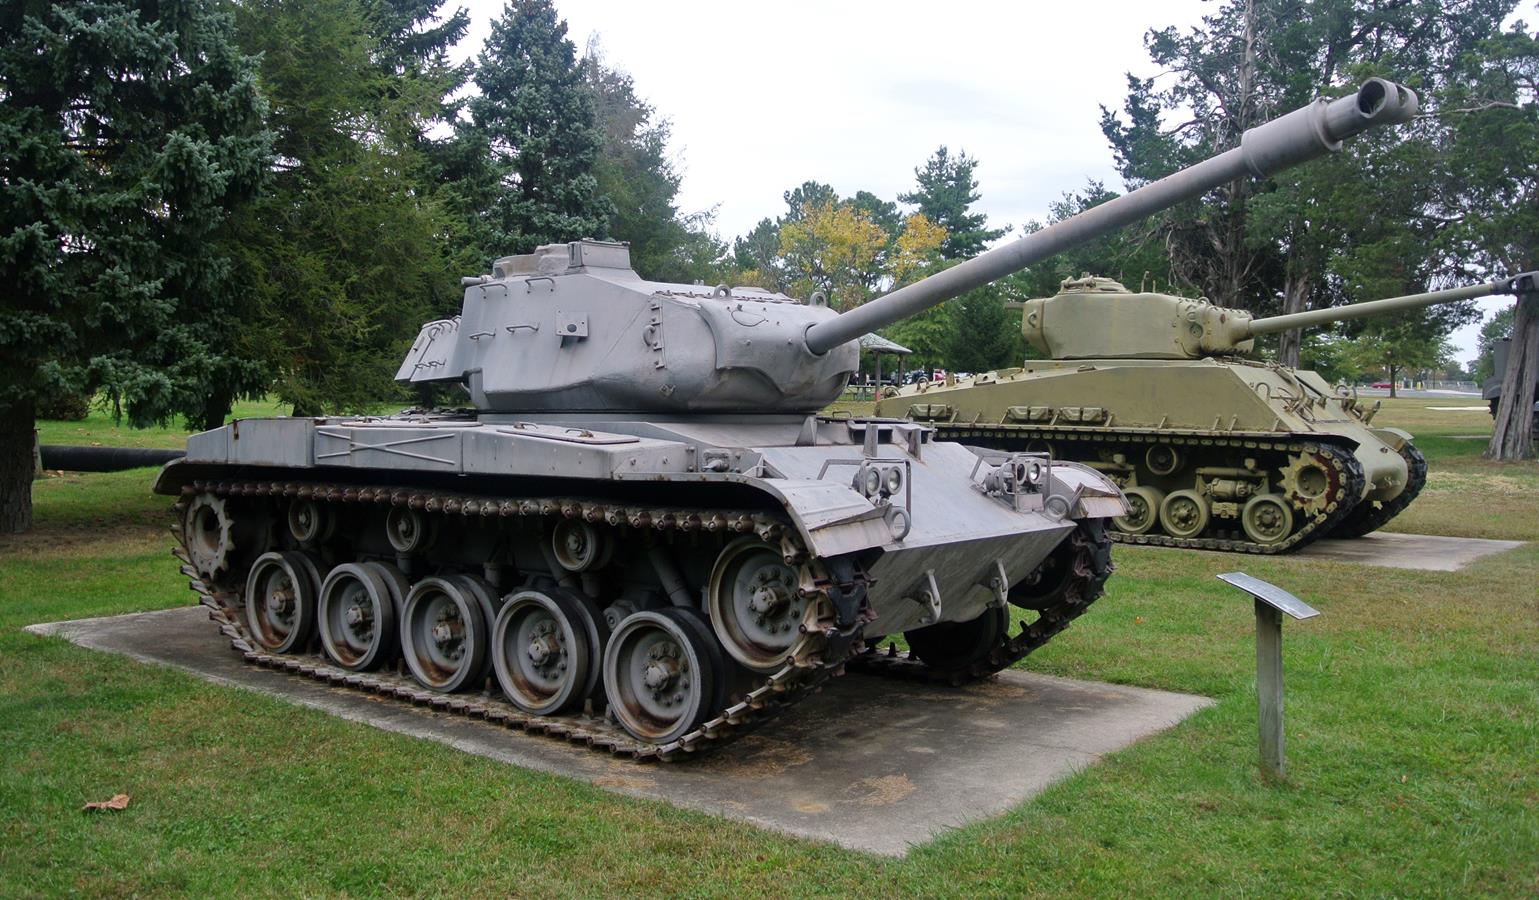 Taiwan abandons the American M41A3 Walker Bulldog light tanks after more than 60 years in service